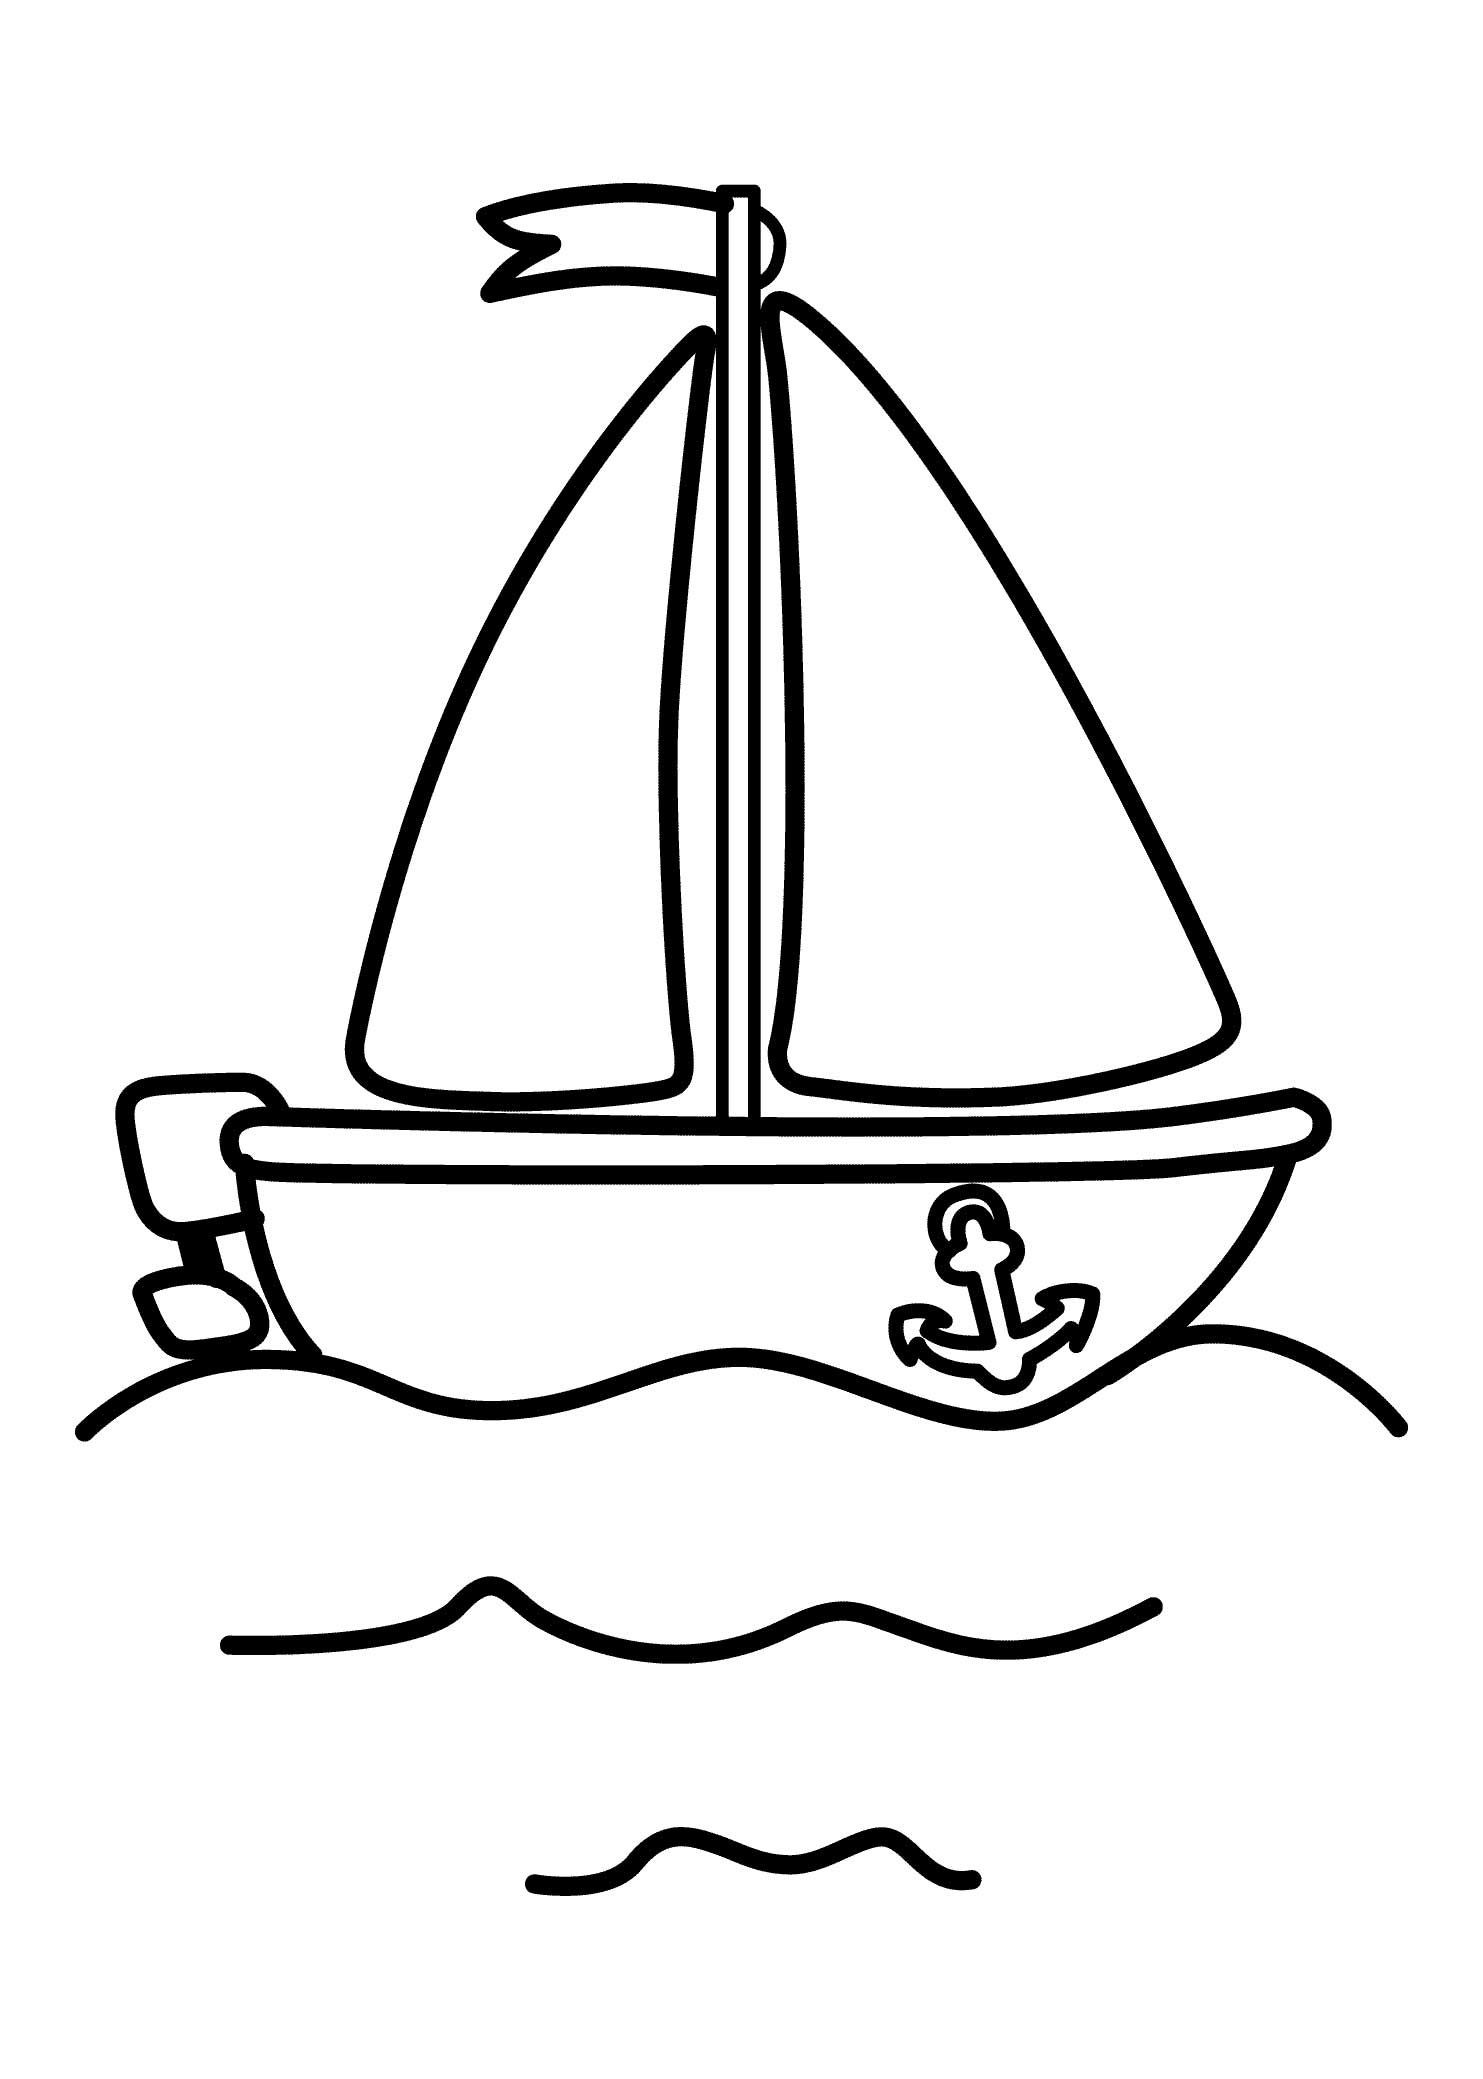 Free Printable Boat Coloring Pages
 Pin by Shreya Thakur on Free Coloring Pages